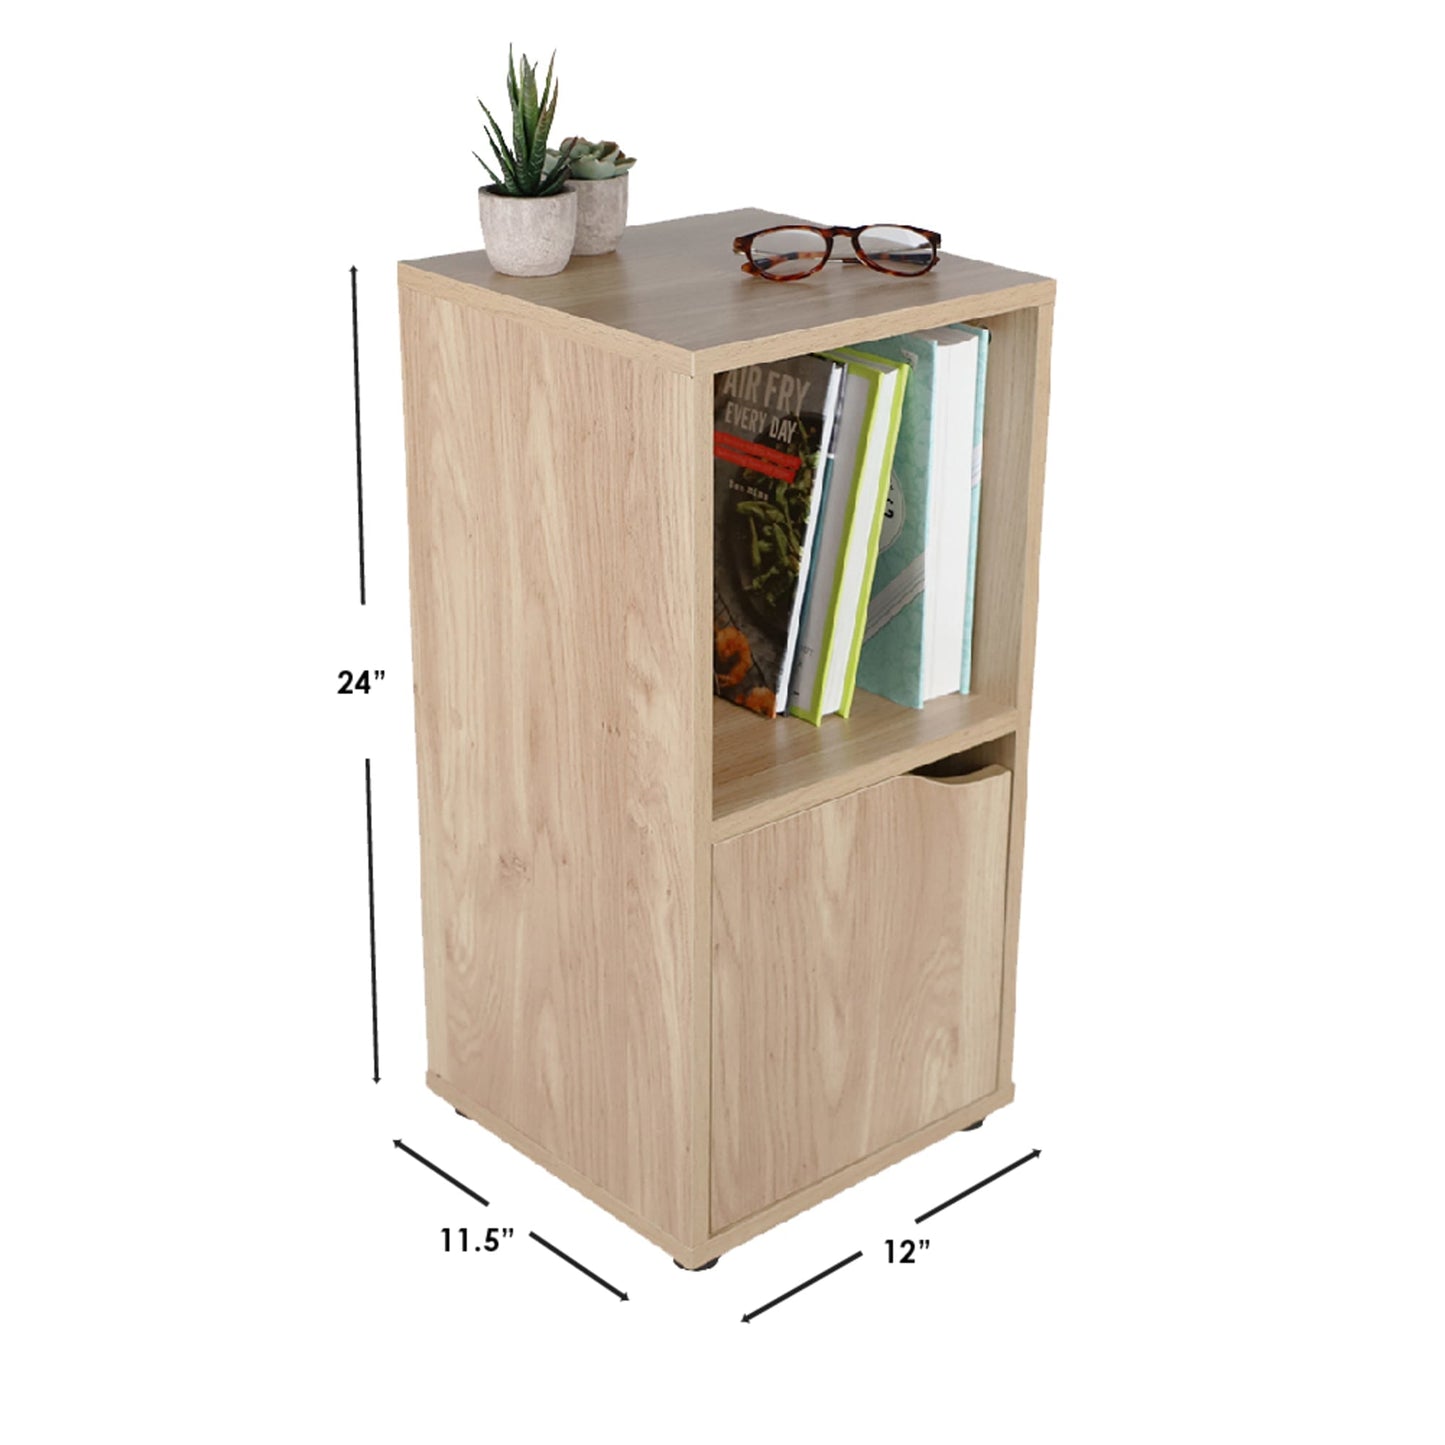 2 Cube Wood Storage Shelf with Doors, Natural